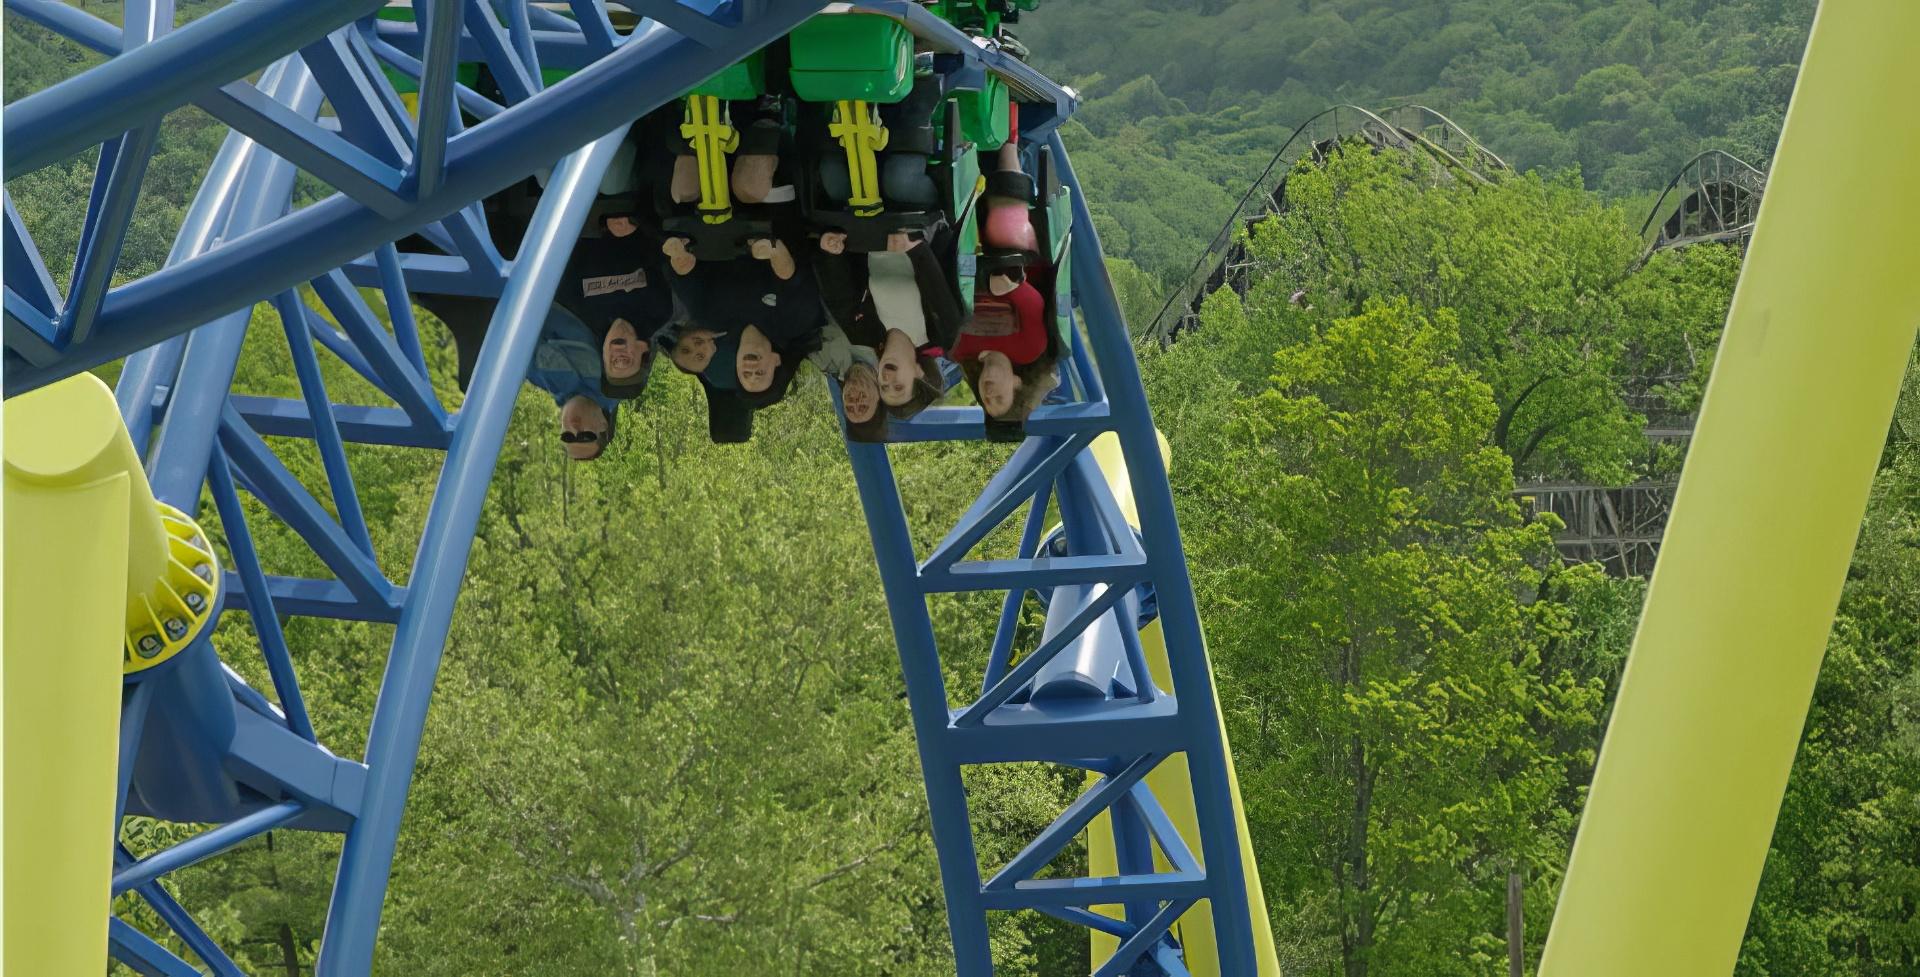 People upside down on a rollercoaster